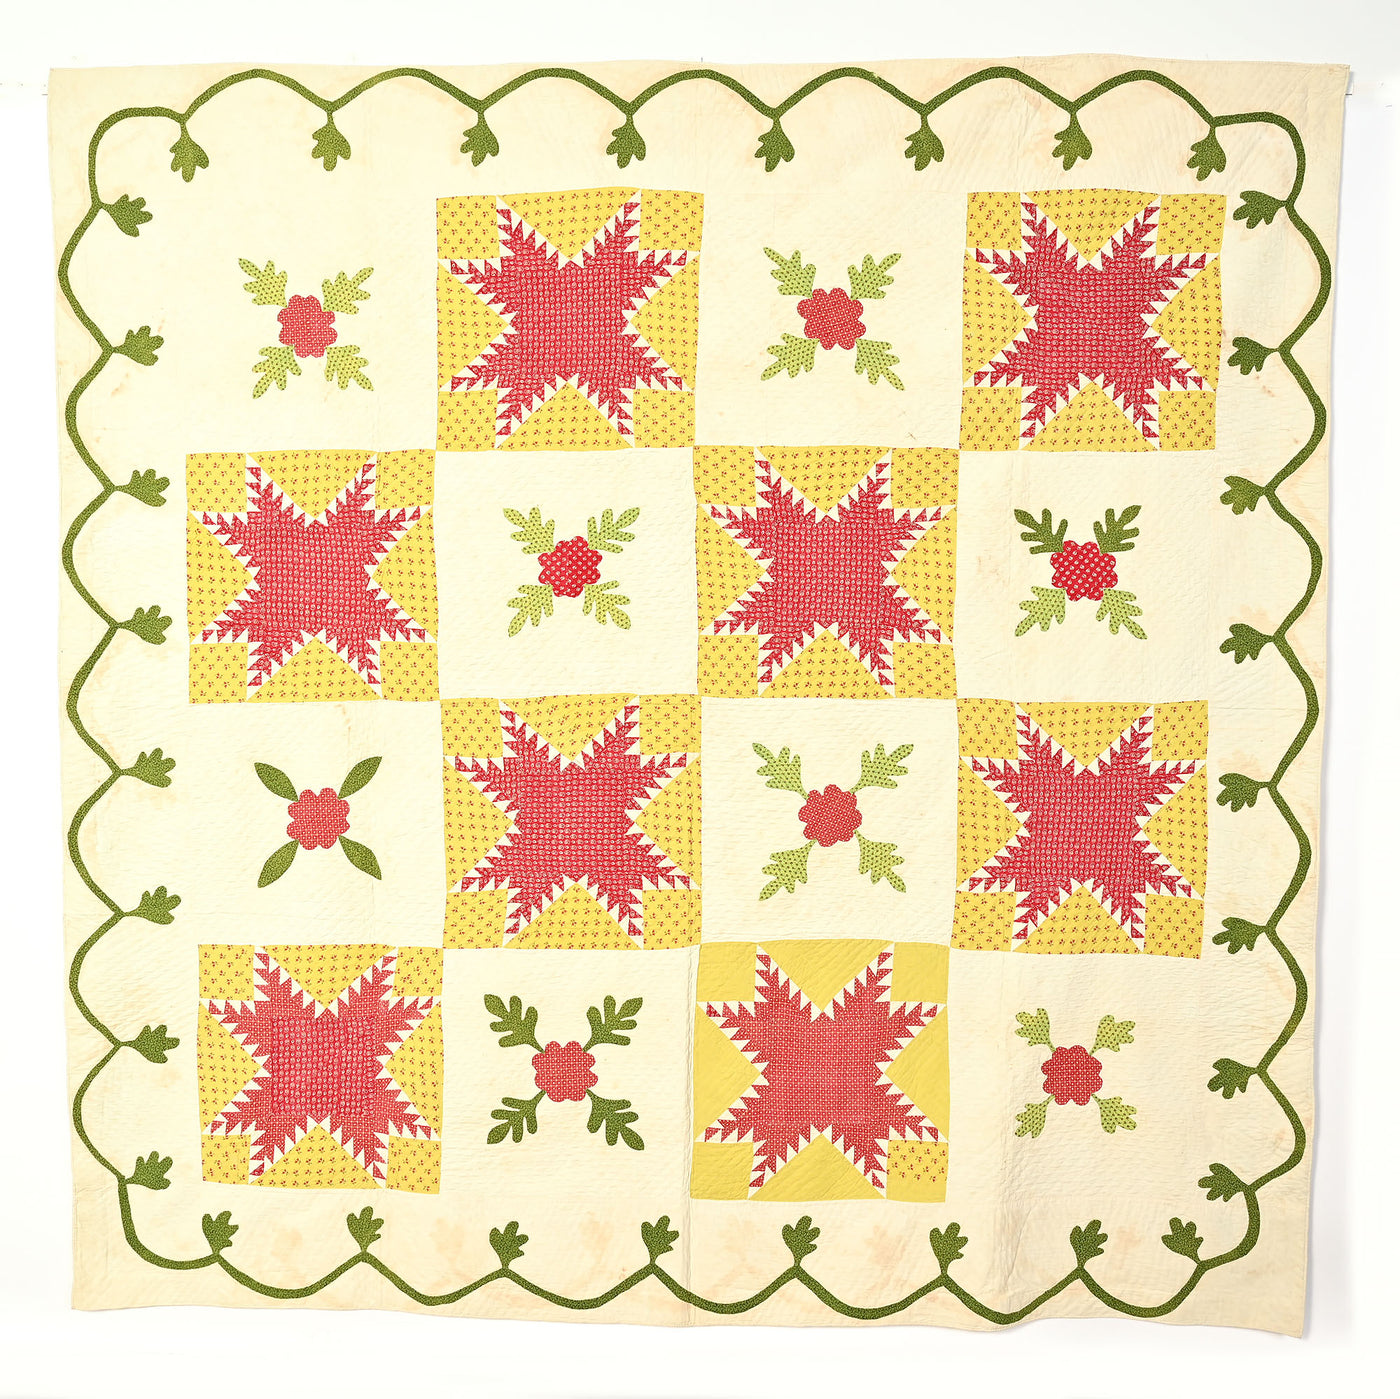 Feathered Stars Antique Quilt with Oakleaf Applique